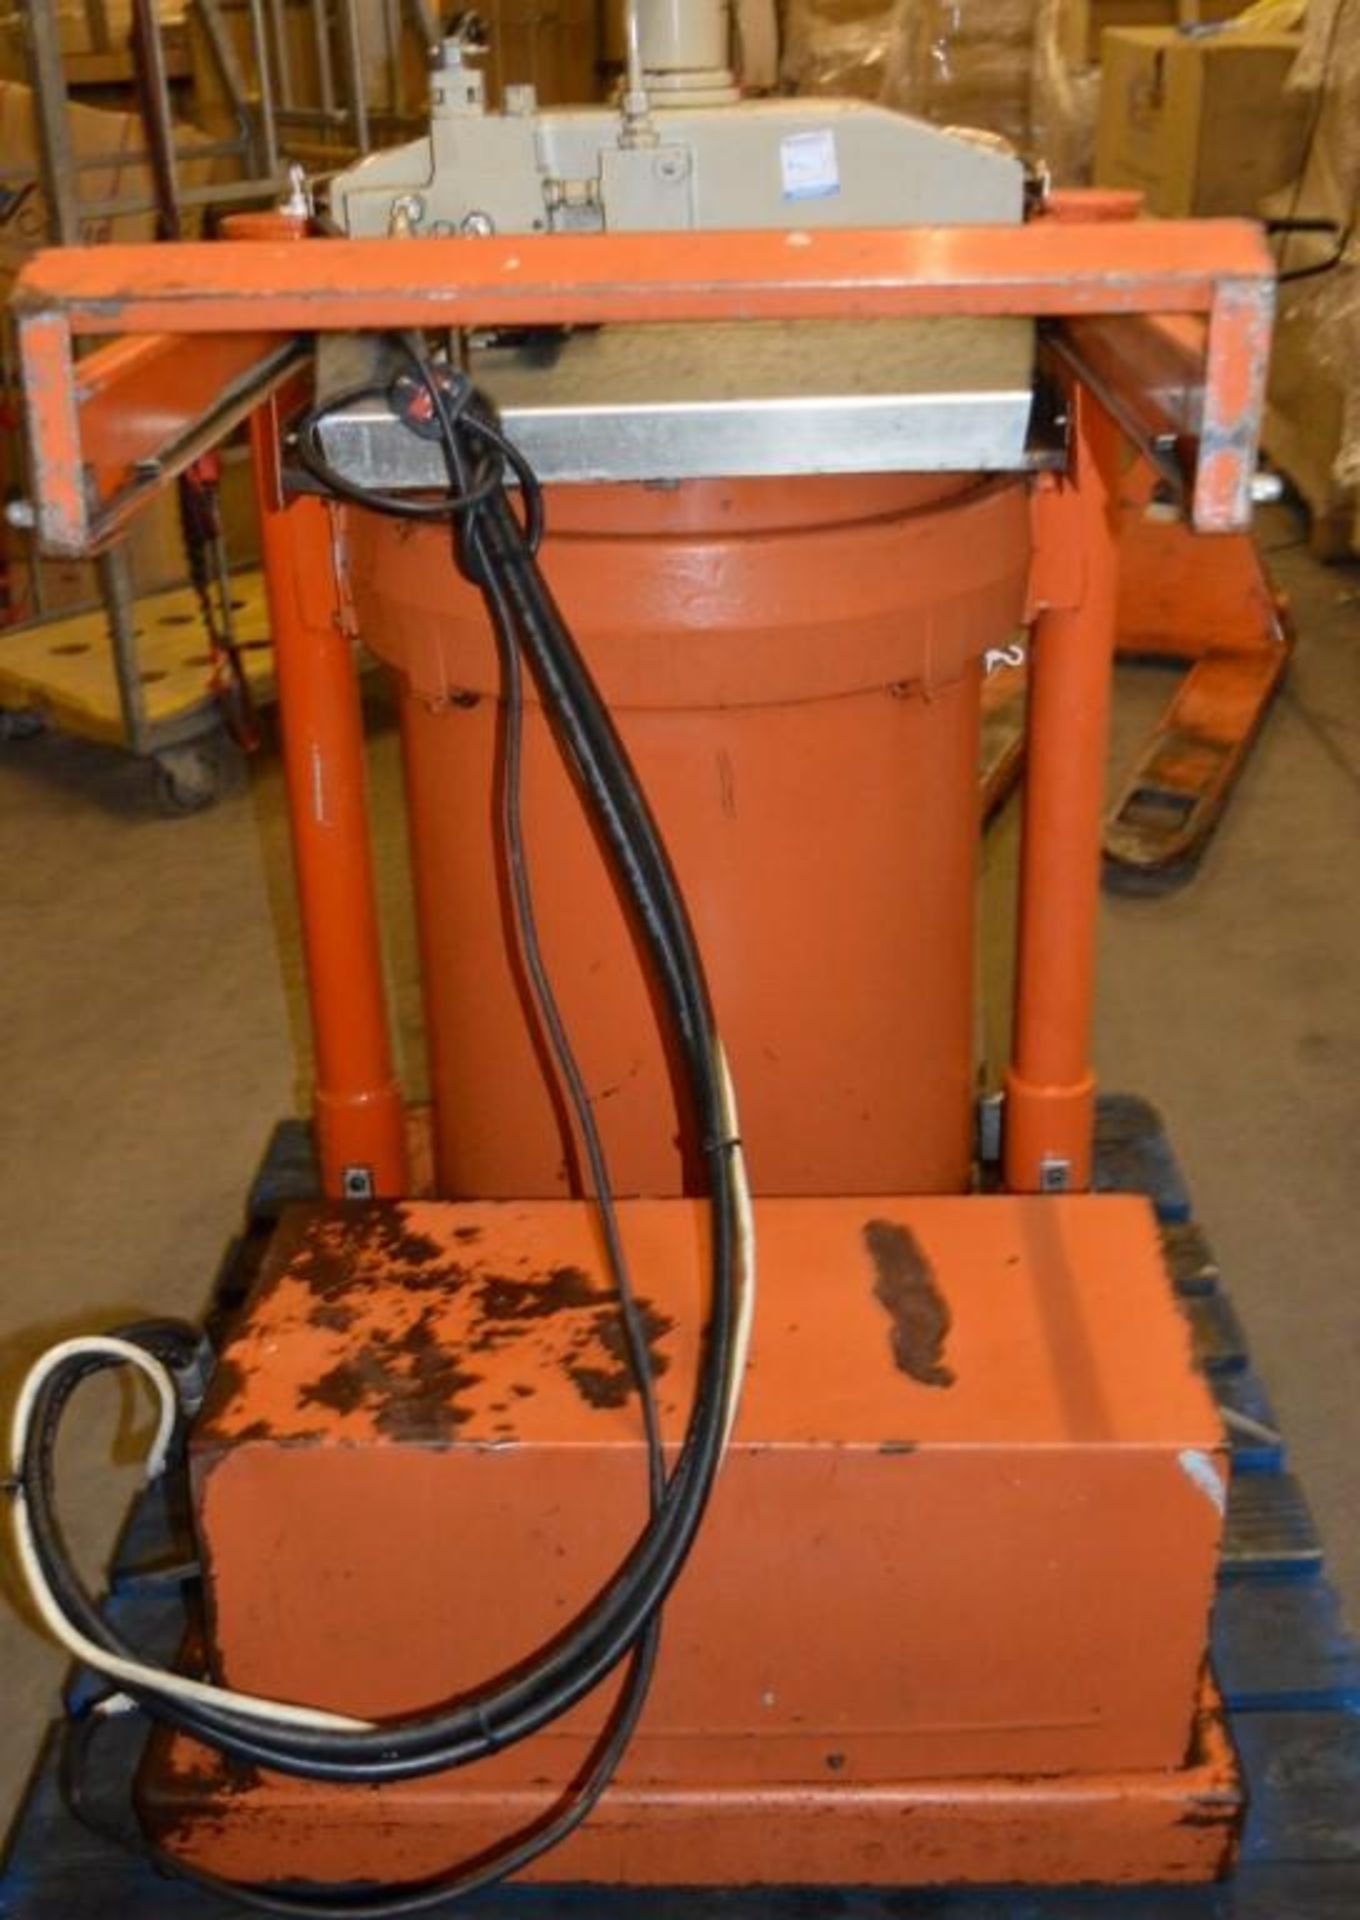 1 x Orwak 5030 Waste Compactor Bailer - Used For Compacting Recyclable or Non-Recyclable Waste - Image 4 of 4